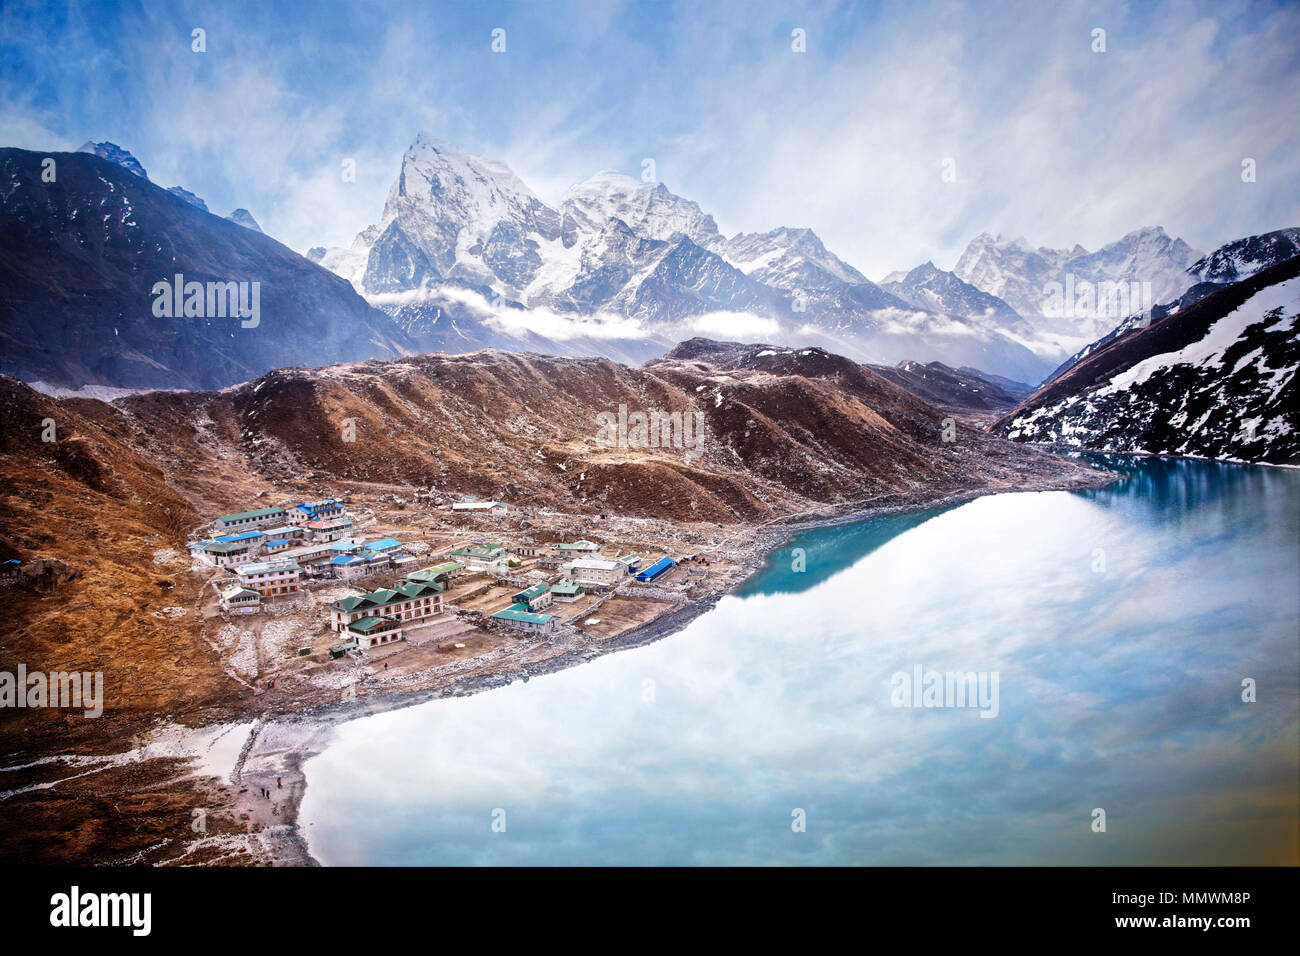 Gokyo and Goyko Lake at over 15,000 feet with Cholatse (6335 meters) and  Tabuche (6367 meters) in the background. Sagarmatha National Park, Nepal  Stock Photo - Alamy